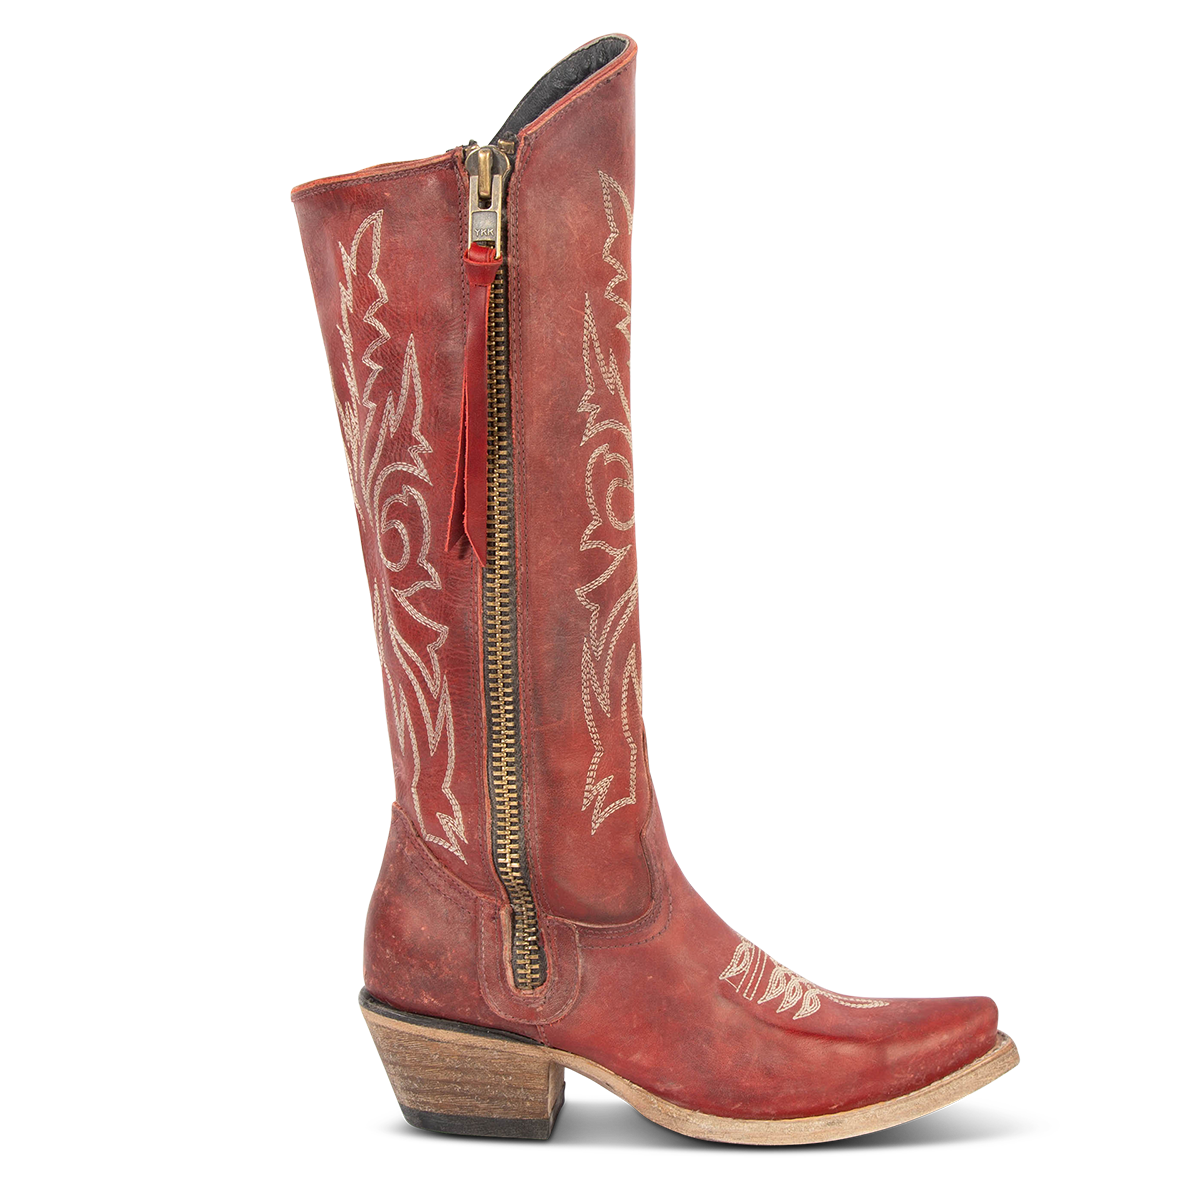 FREEBIRD women's Wolfgang red tall western boot snip toe and outer zip closures